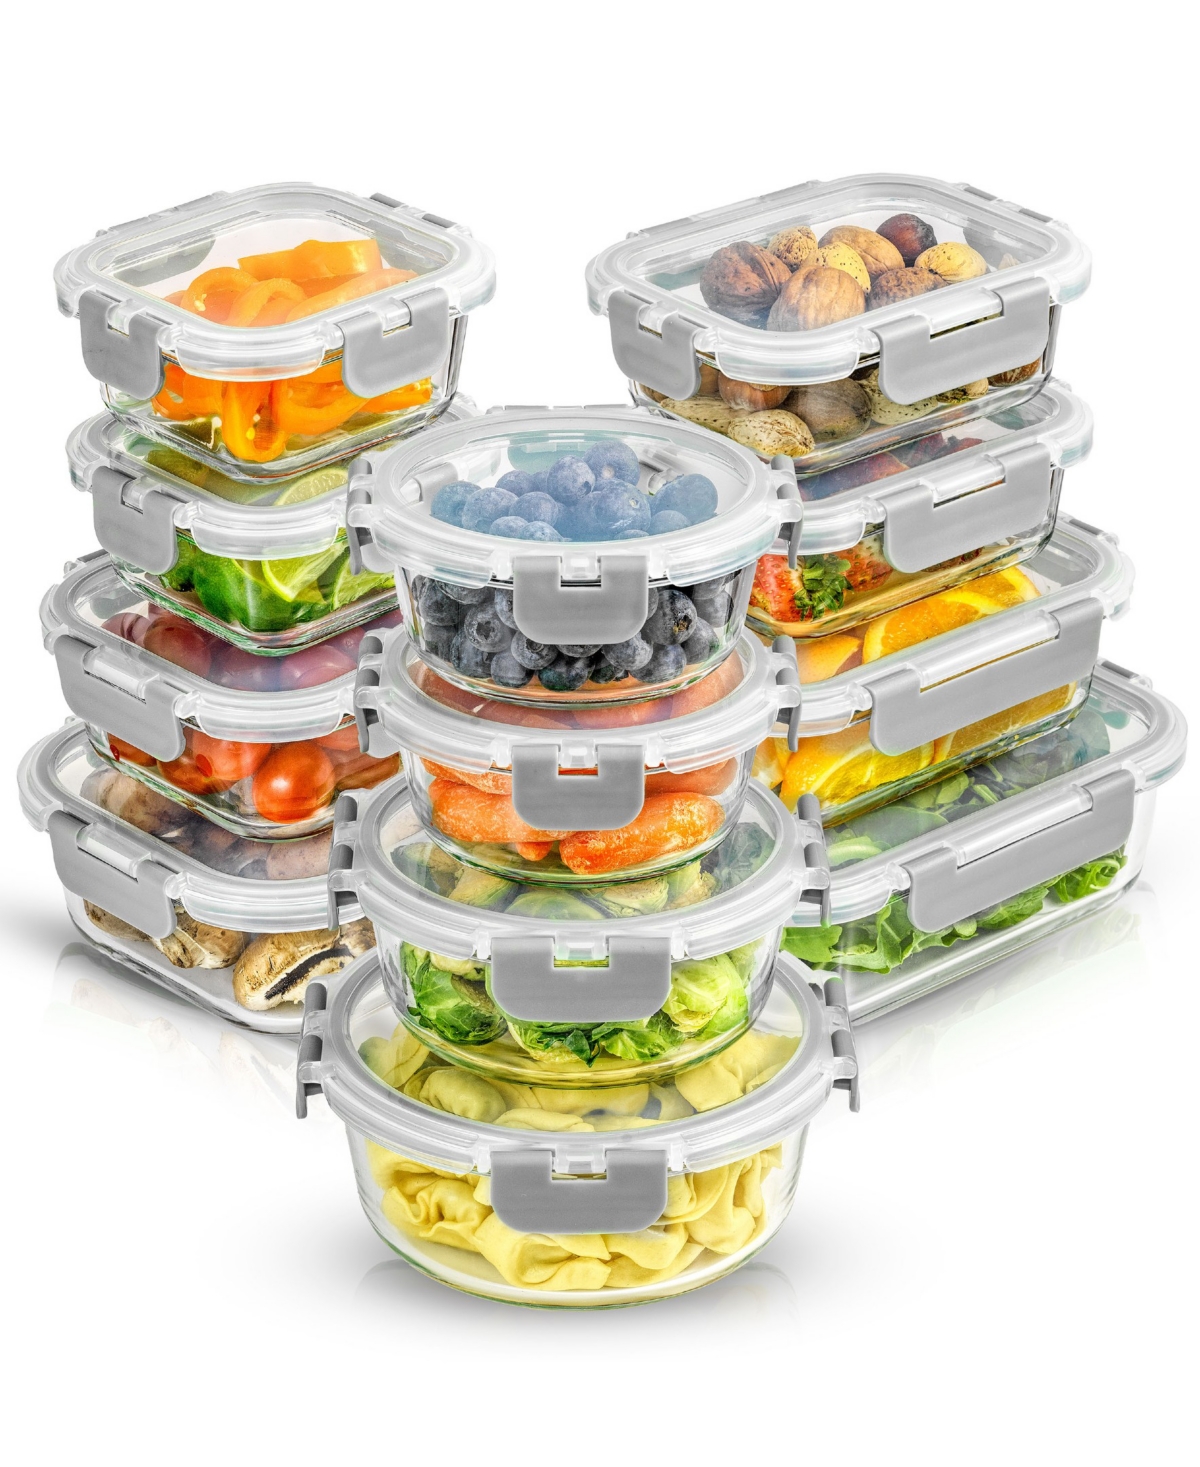 Glass Storage Containers with Leakproof Lids, Set of 12 - Clear, Gray